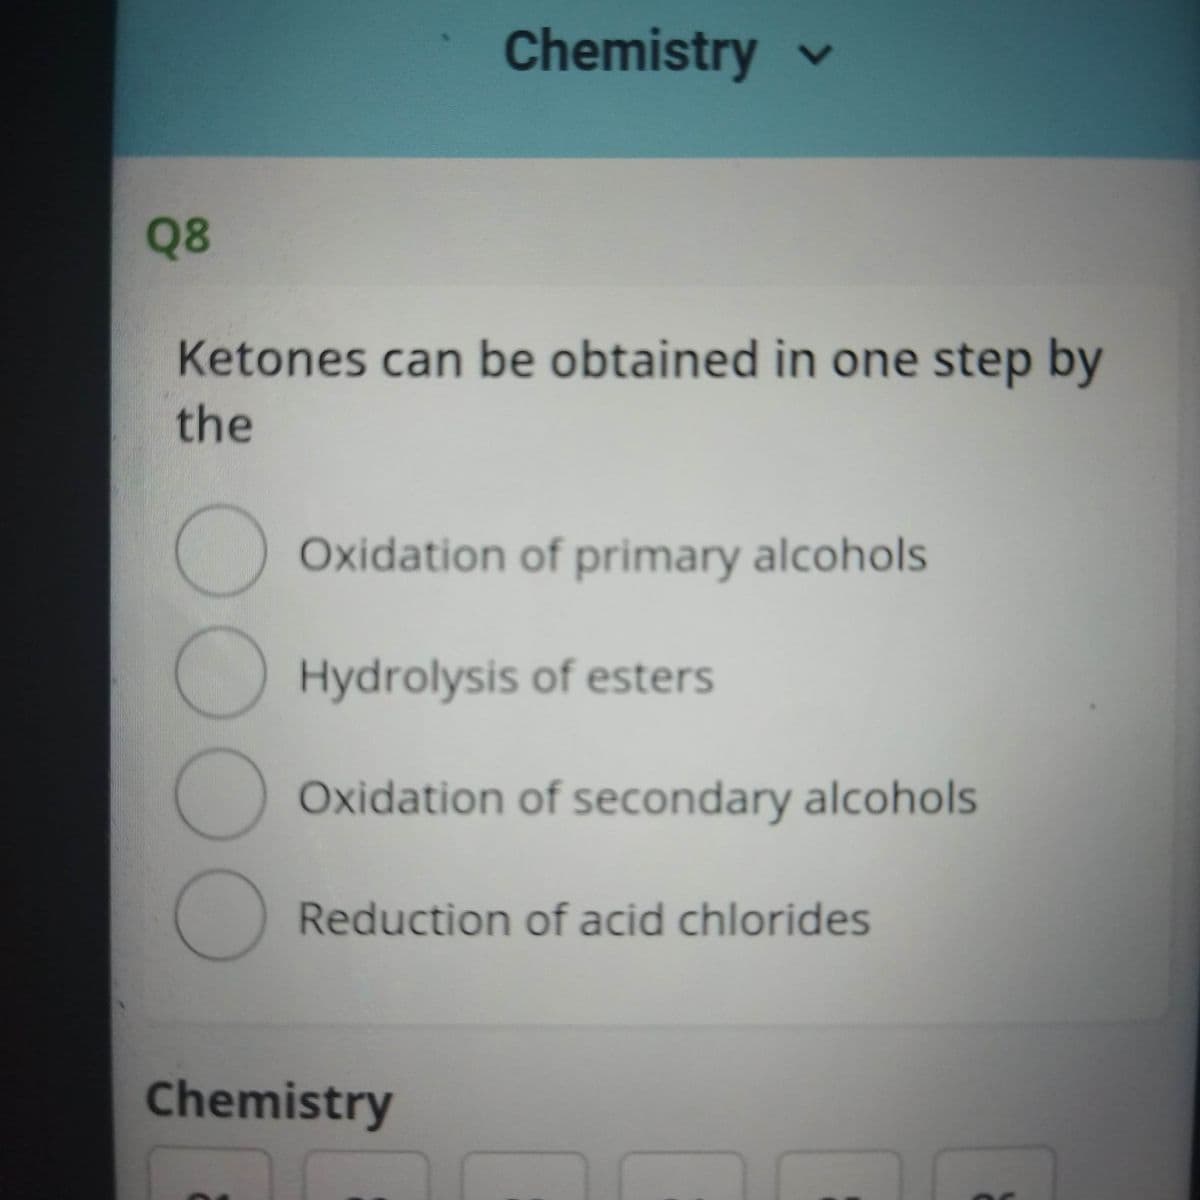 Chemistry v
Q8
Ketones can be obtained in one step by
the
Oxidation of primary alcohols
Hydrolysis of esters
Oxidation of secondary alcohols
Reduction of acid chlorides
Chemistry
